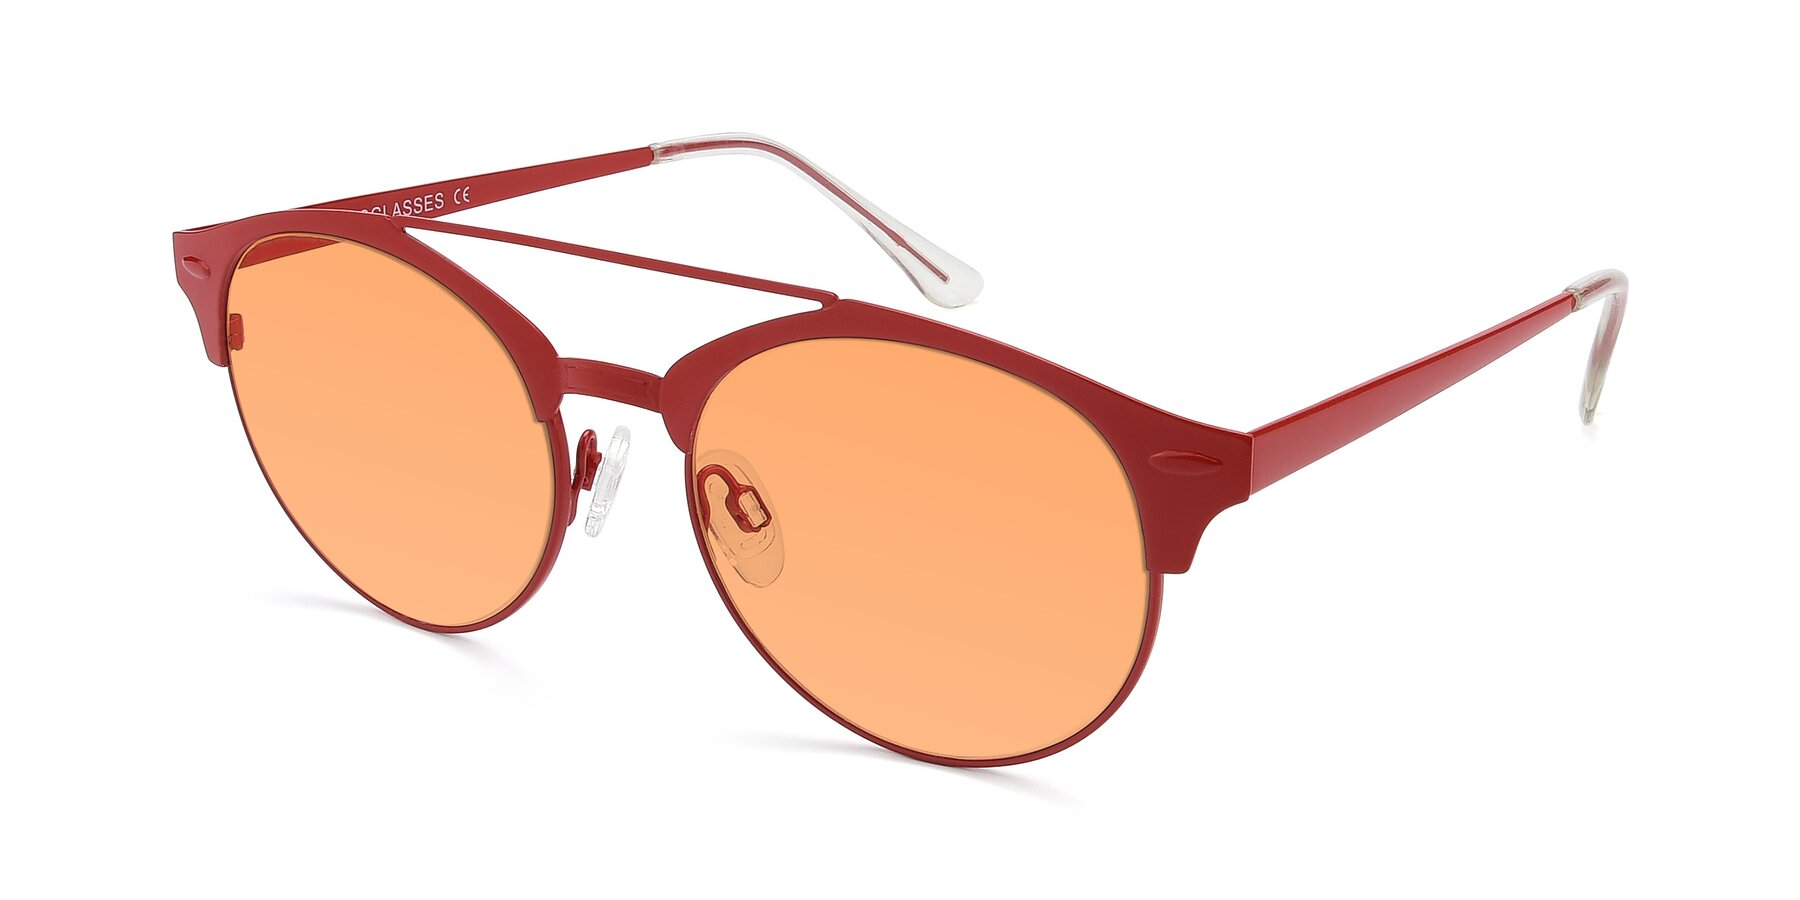 Angle of SSR183 in Red with Medium Orange Tinted Lenses